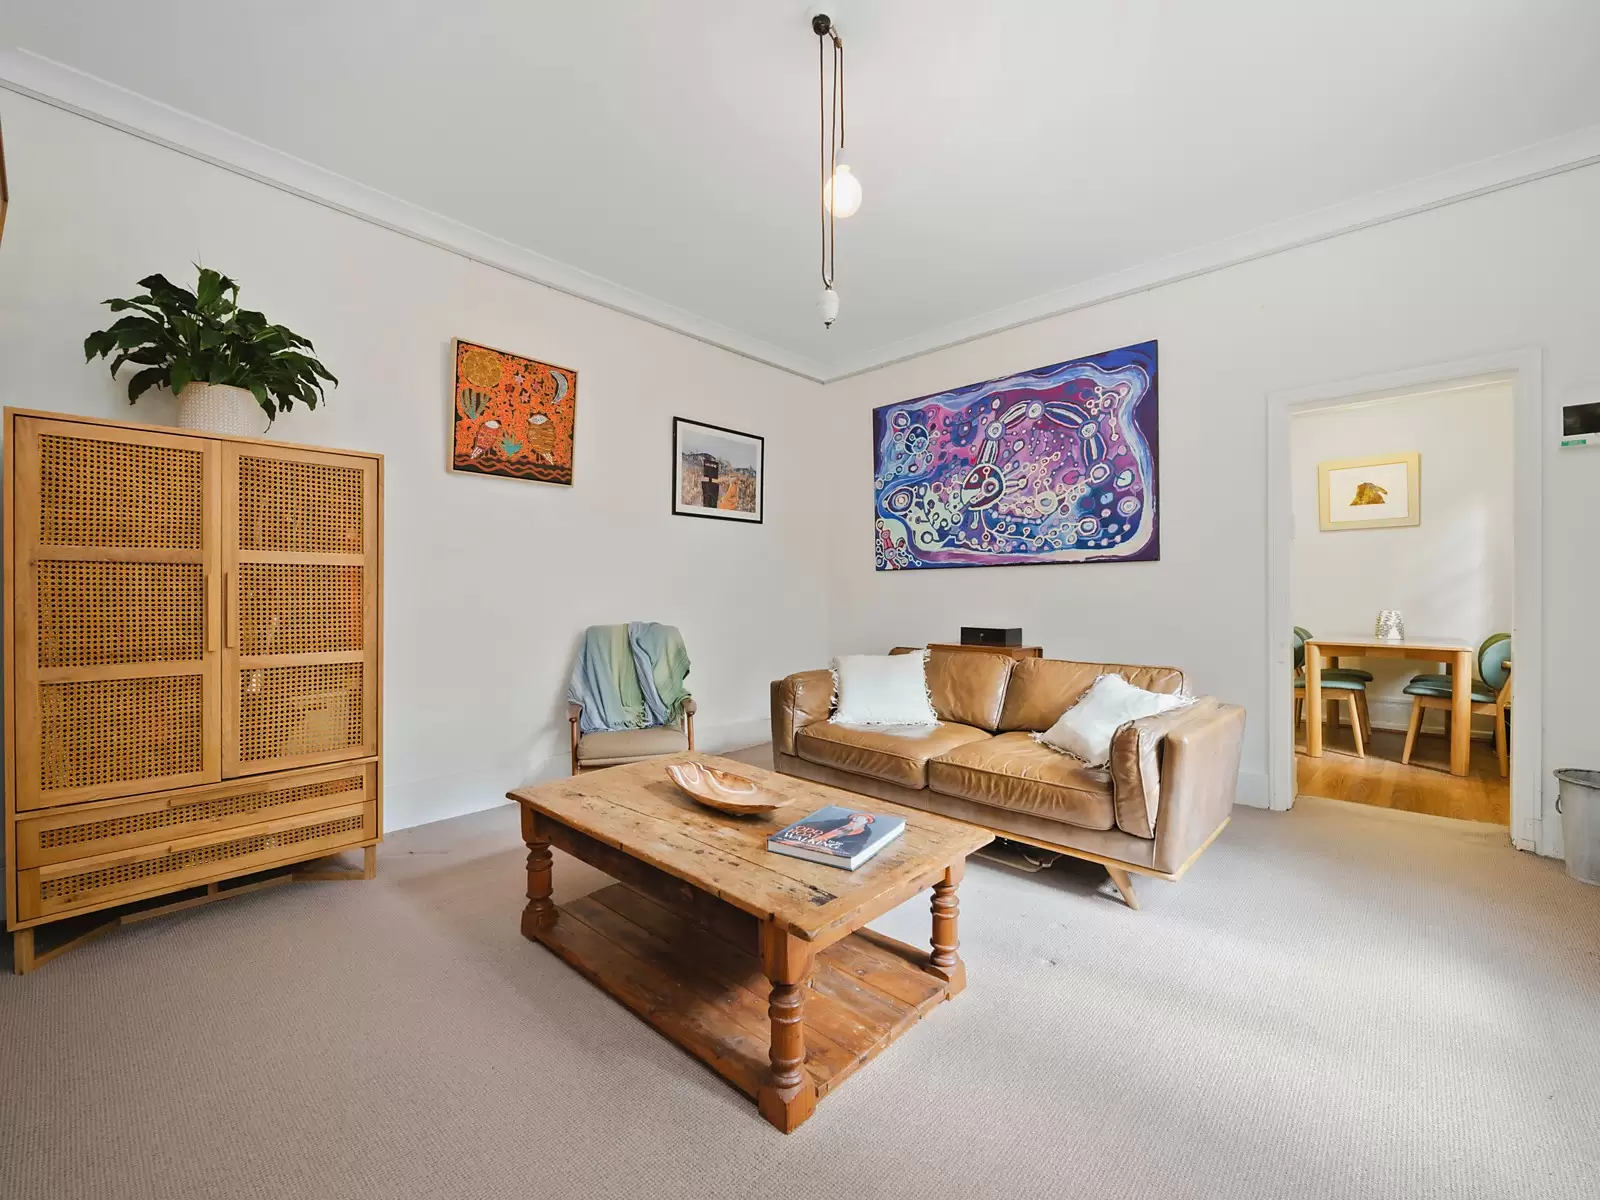 Photo #4: 7/289-291 Edgecliff Road, Woollahra - Sold by Sydney Sotheby's International Realty